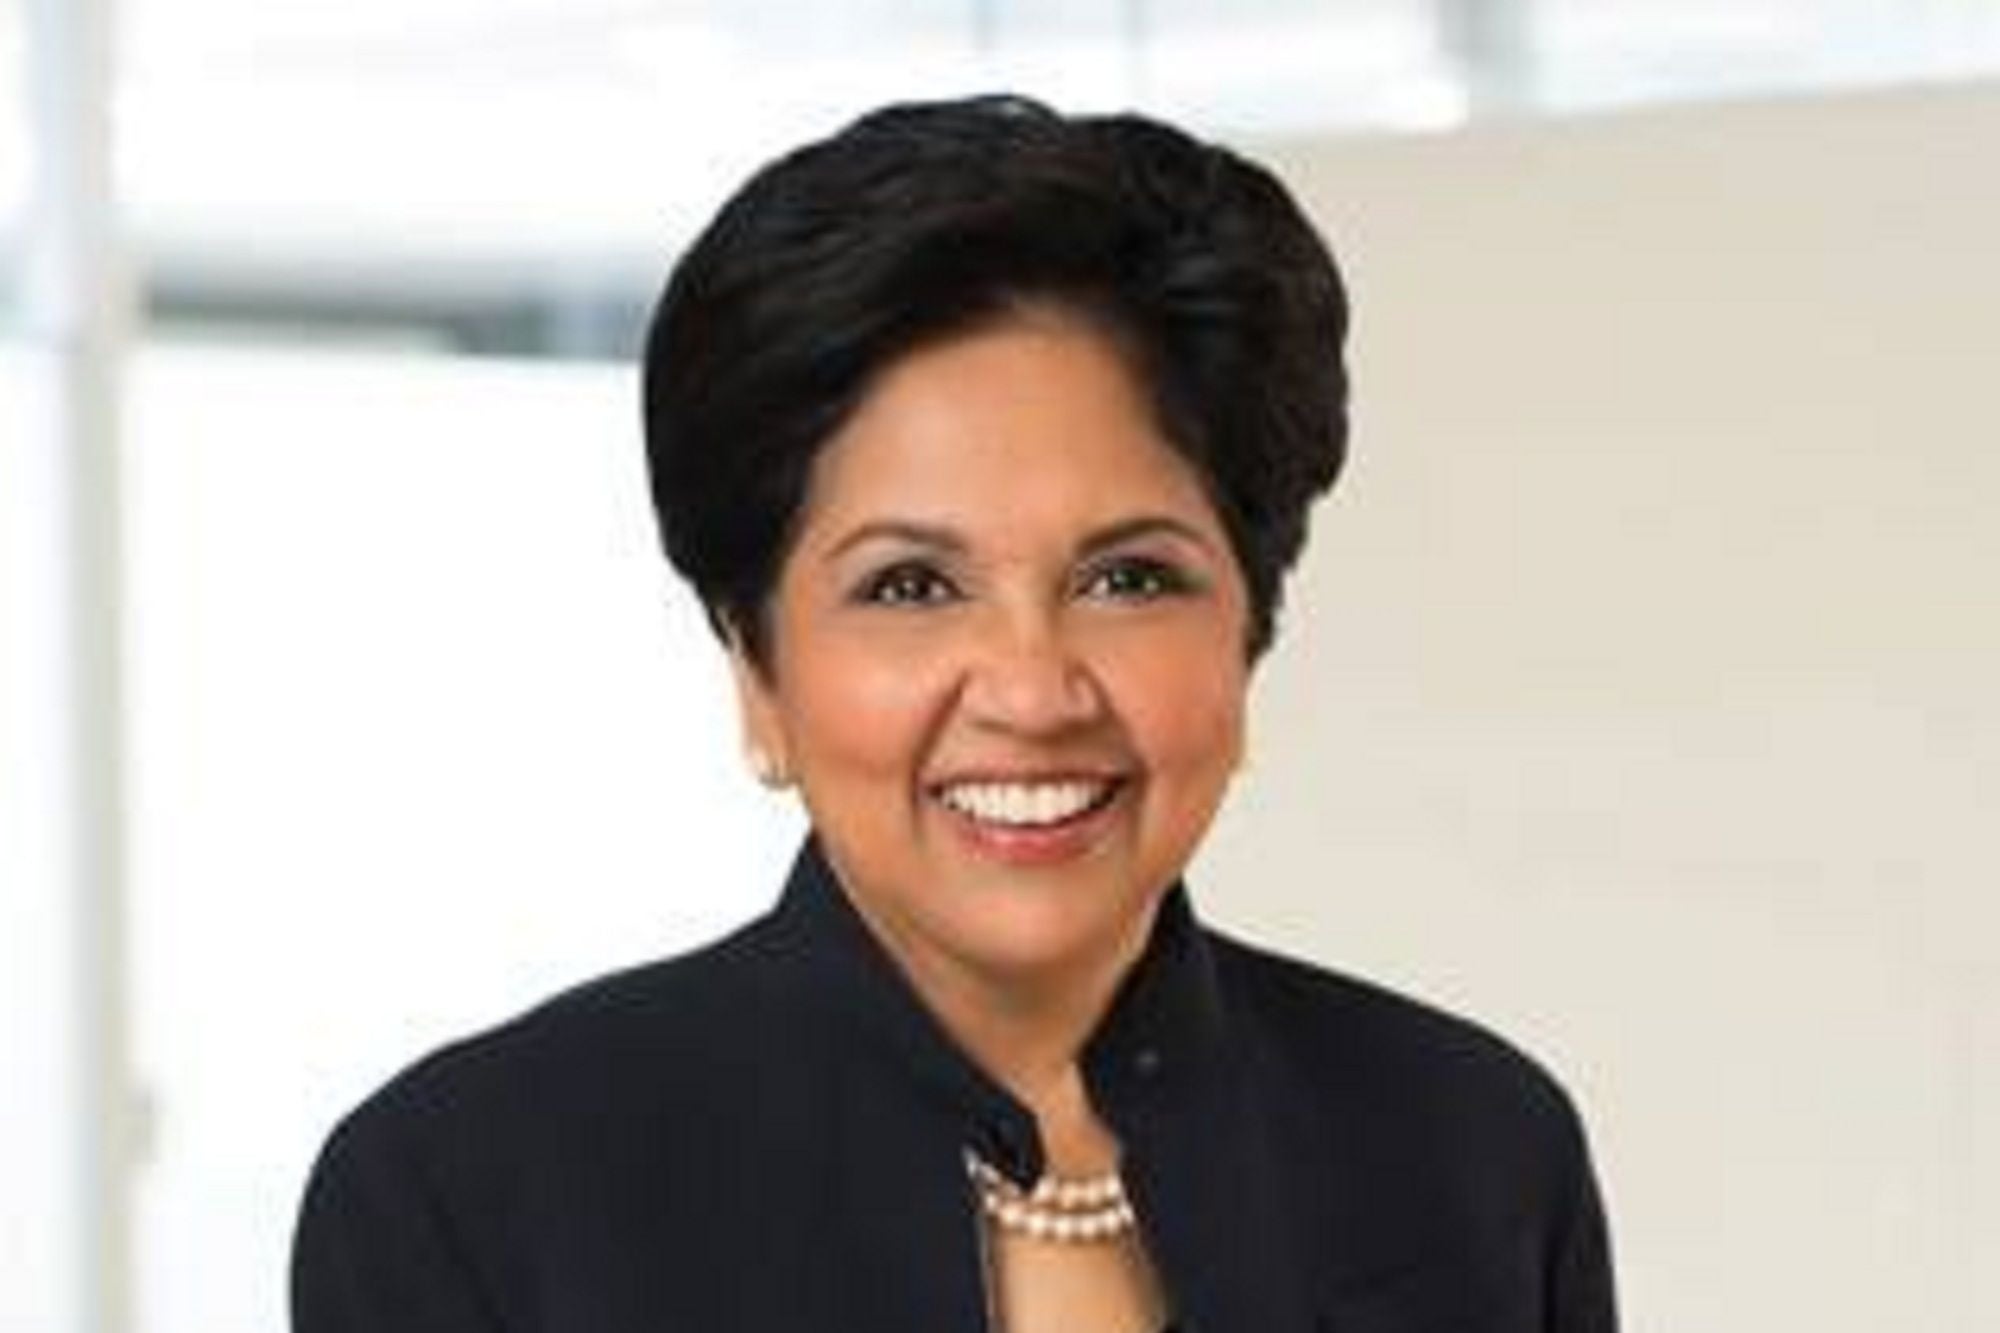 Motivational Quotes by Entrepreneur Women - Indra Nooyi